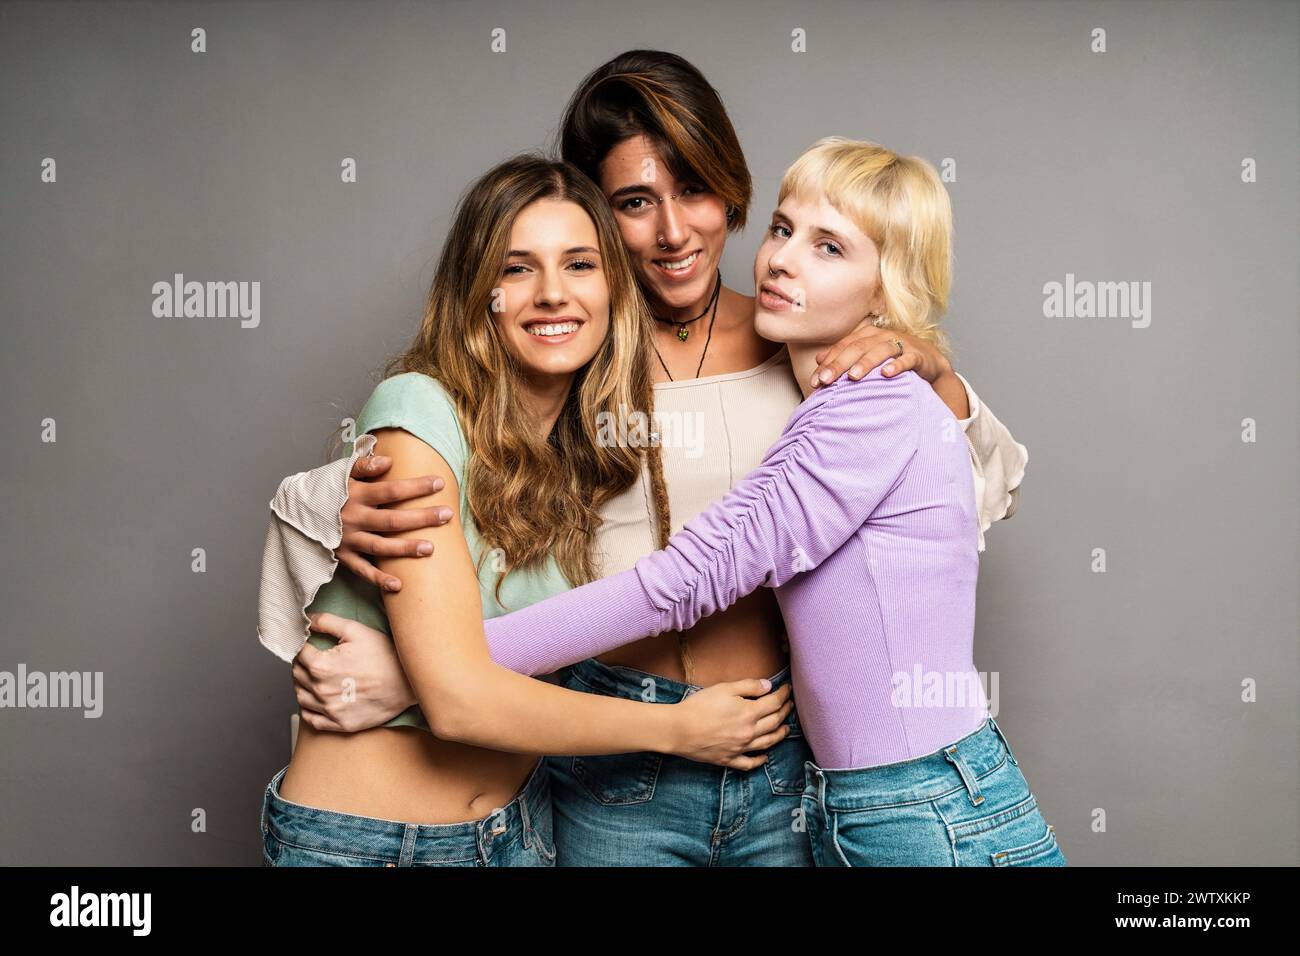 Group of three young women - embracing - Multiracial female friends smiling, bonding and embracing together - diversity and togetherness represented, Stock Photo